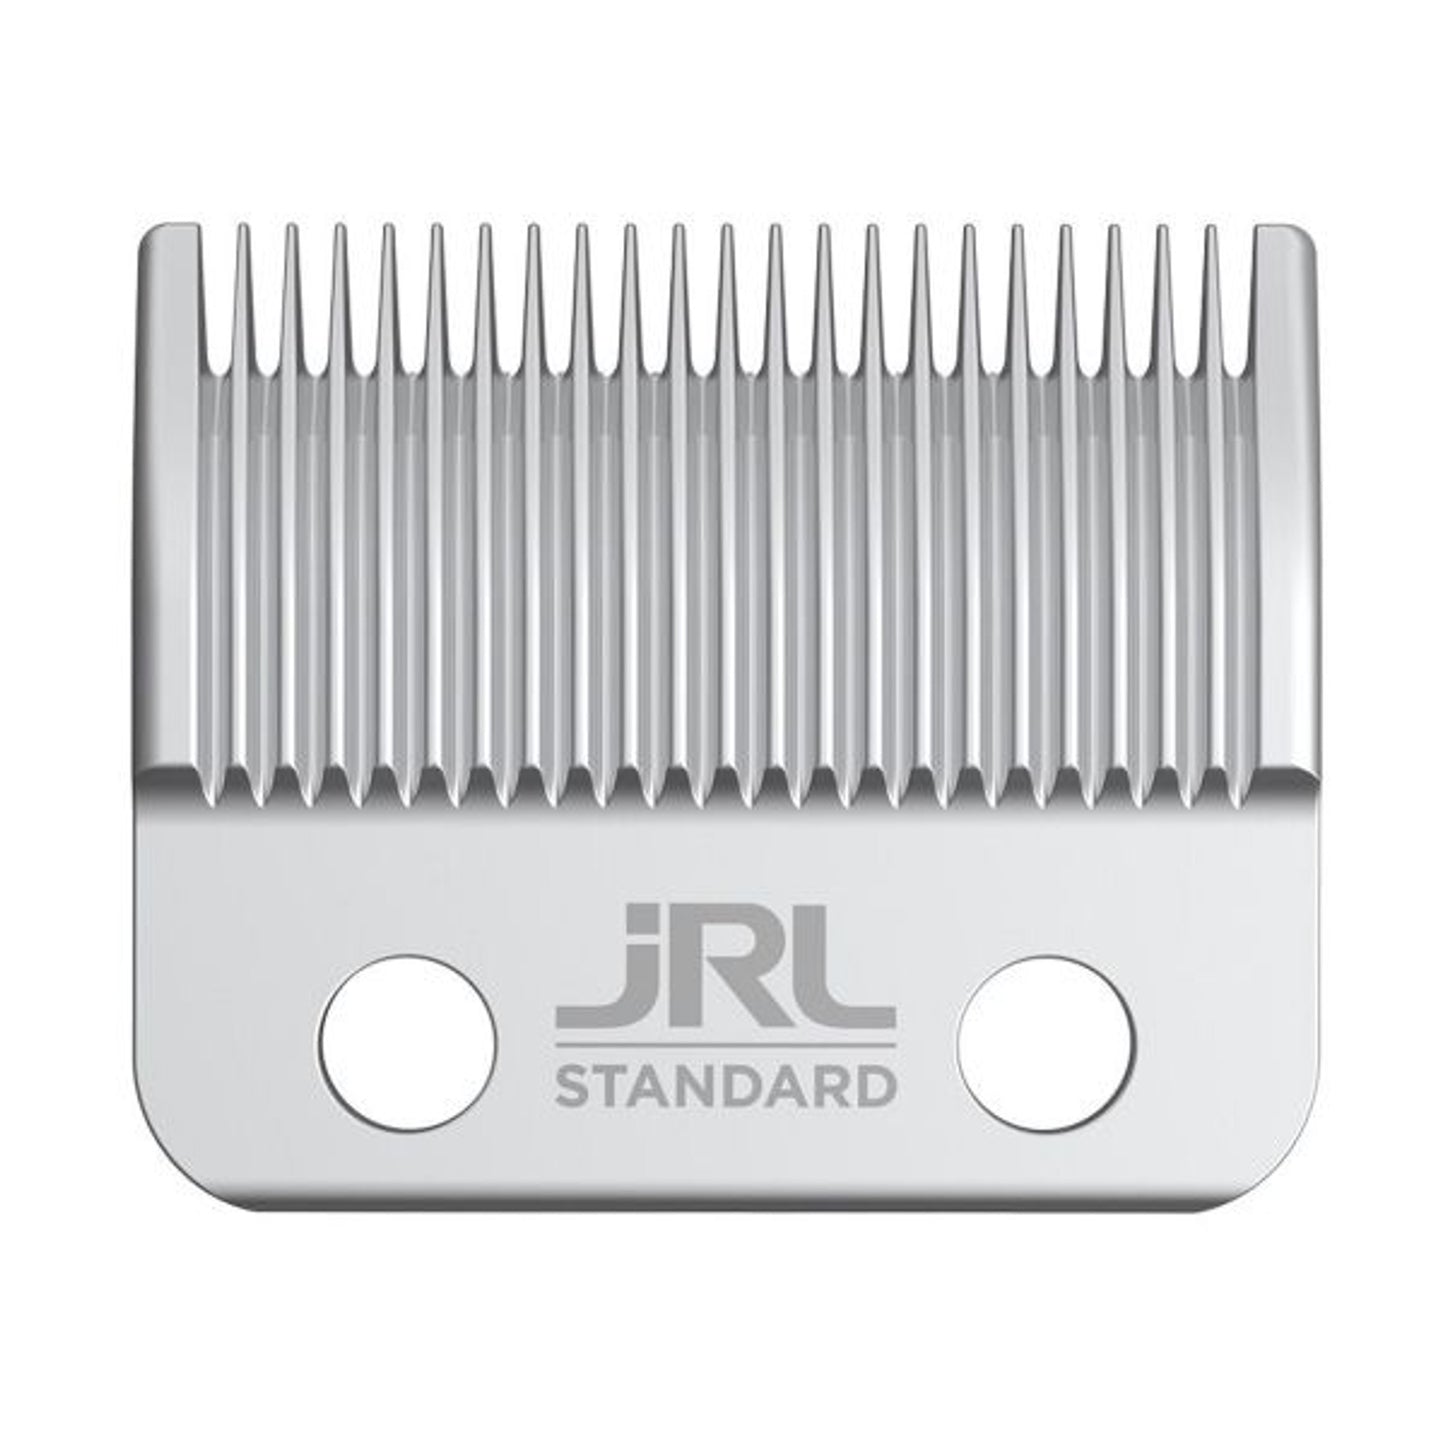 JRL Professional Ultra Cool Stainless Steel Standard Blade